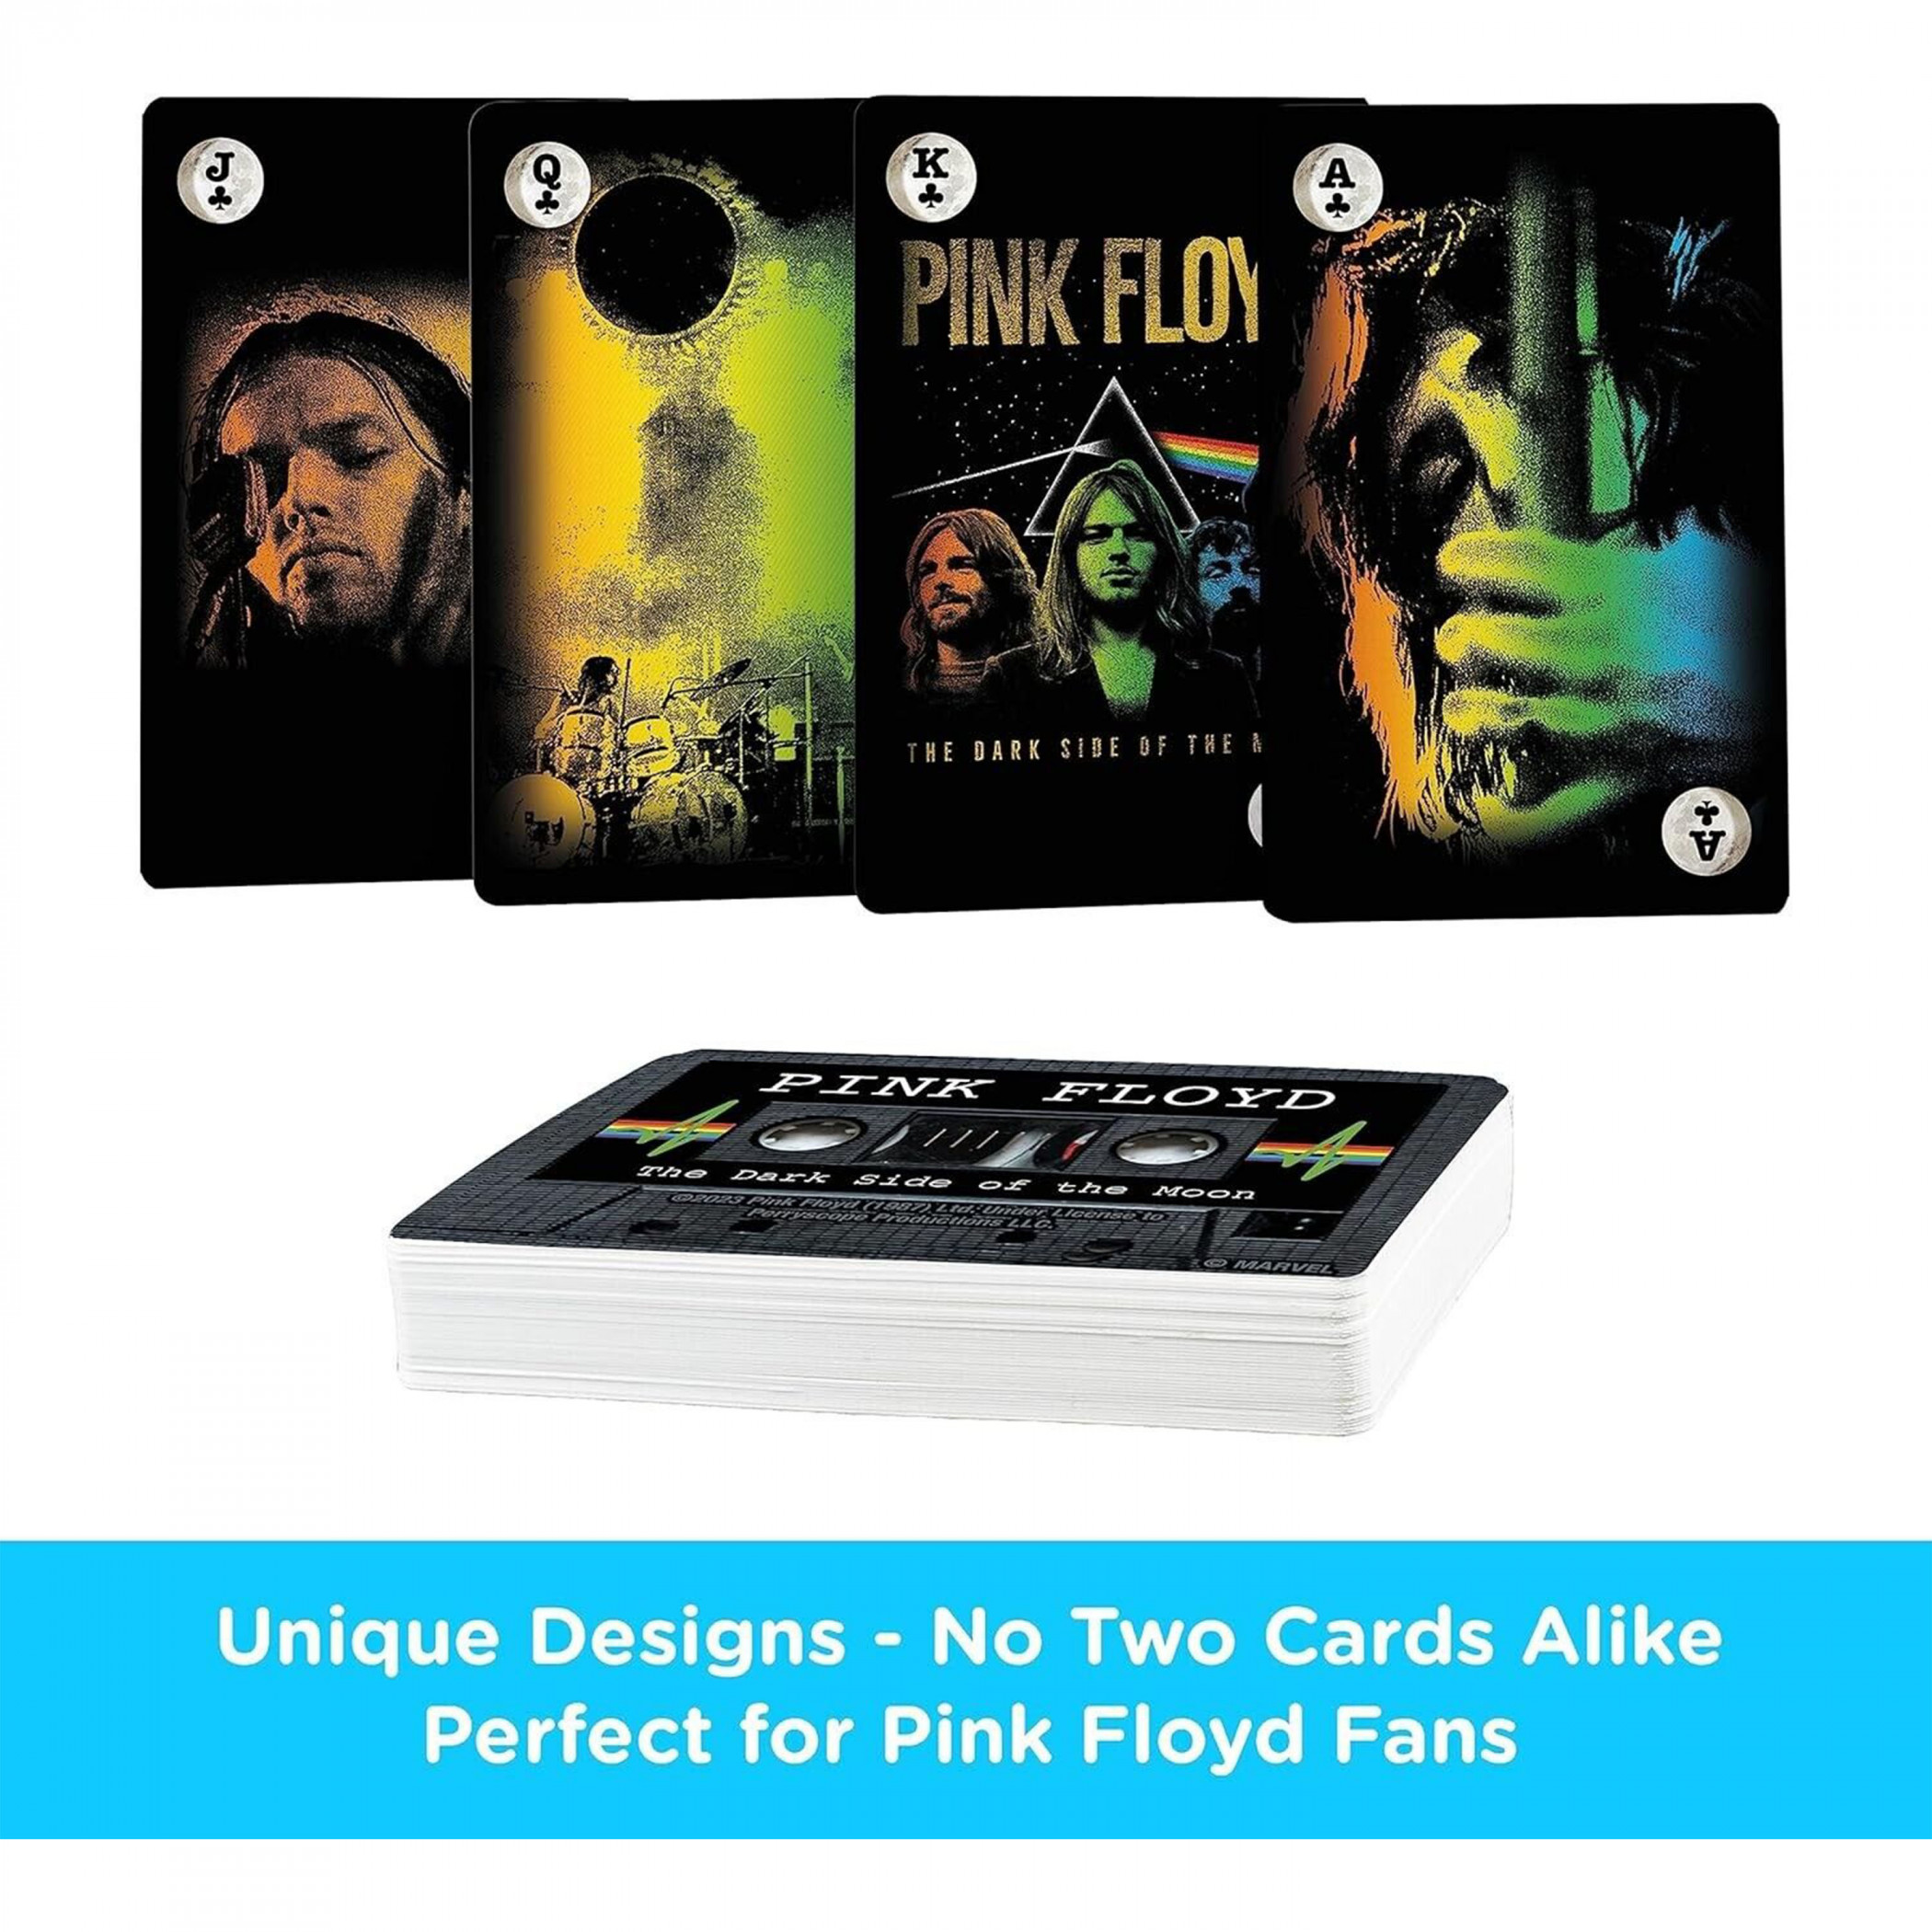 Pink Floyd Cassette Playing Cards